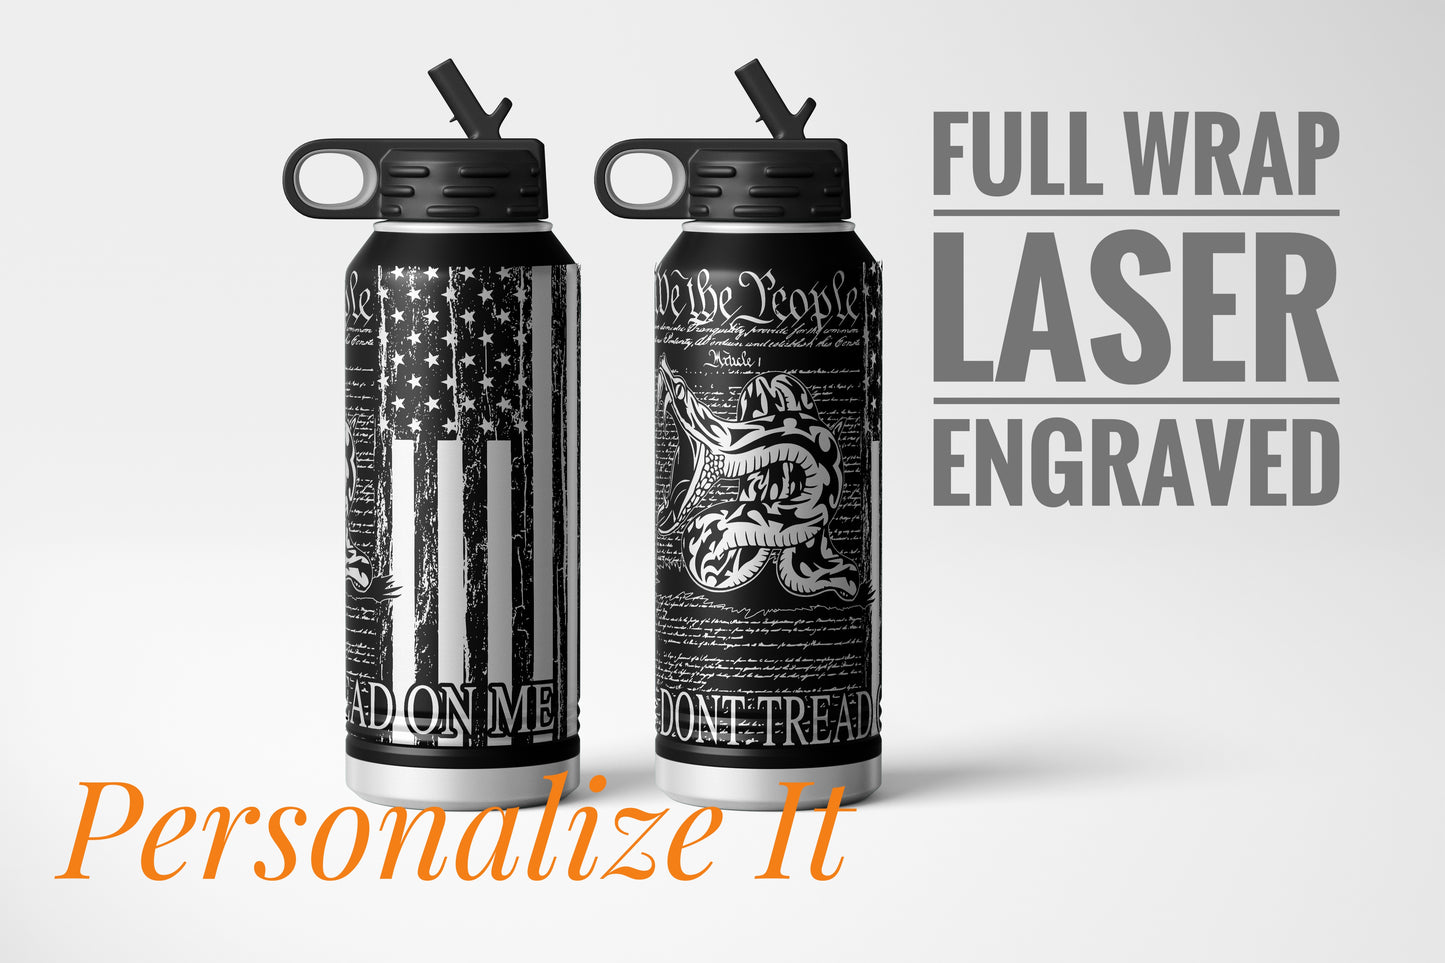 WE THE PEOPLE.  32oz Full 360 degree Engraved Wrap